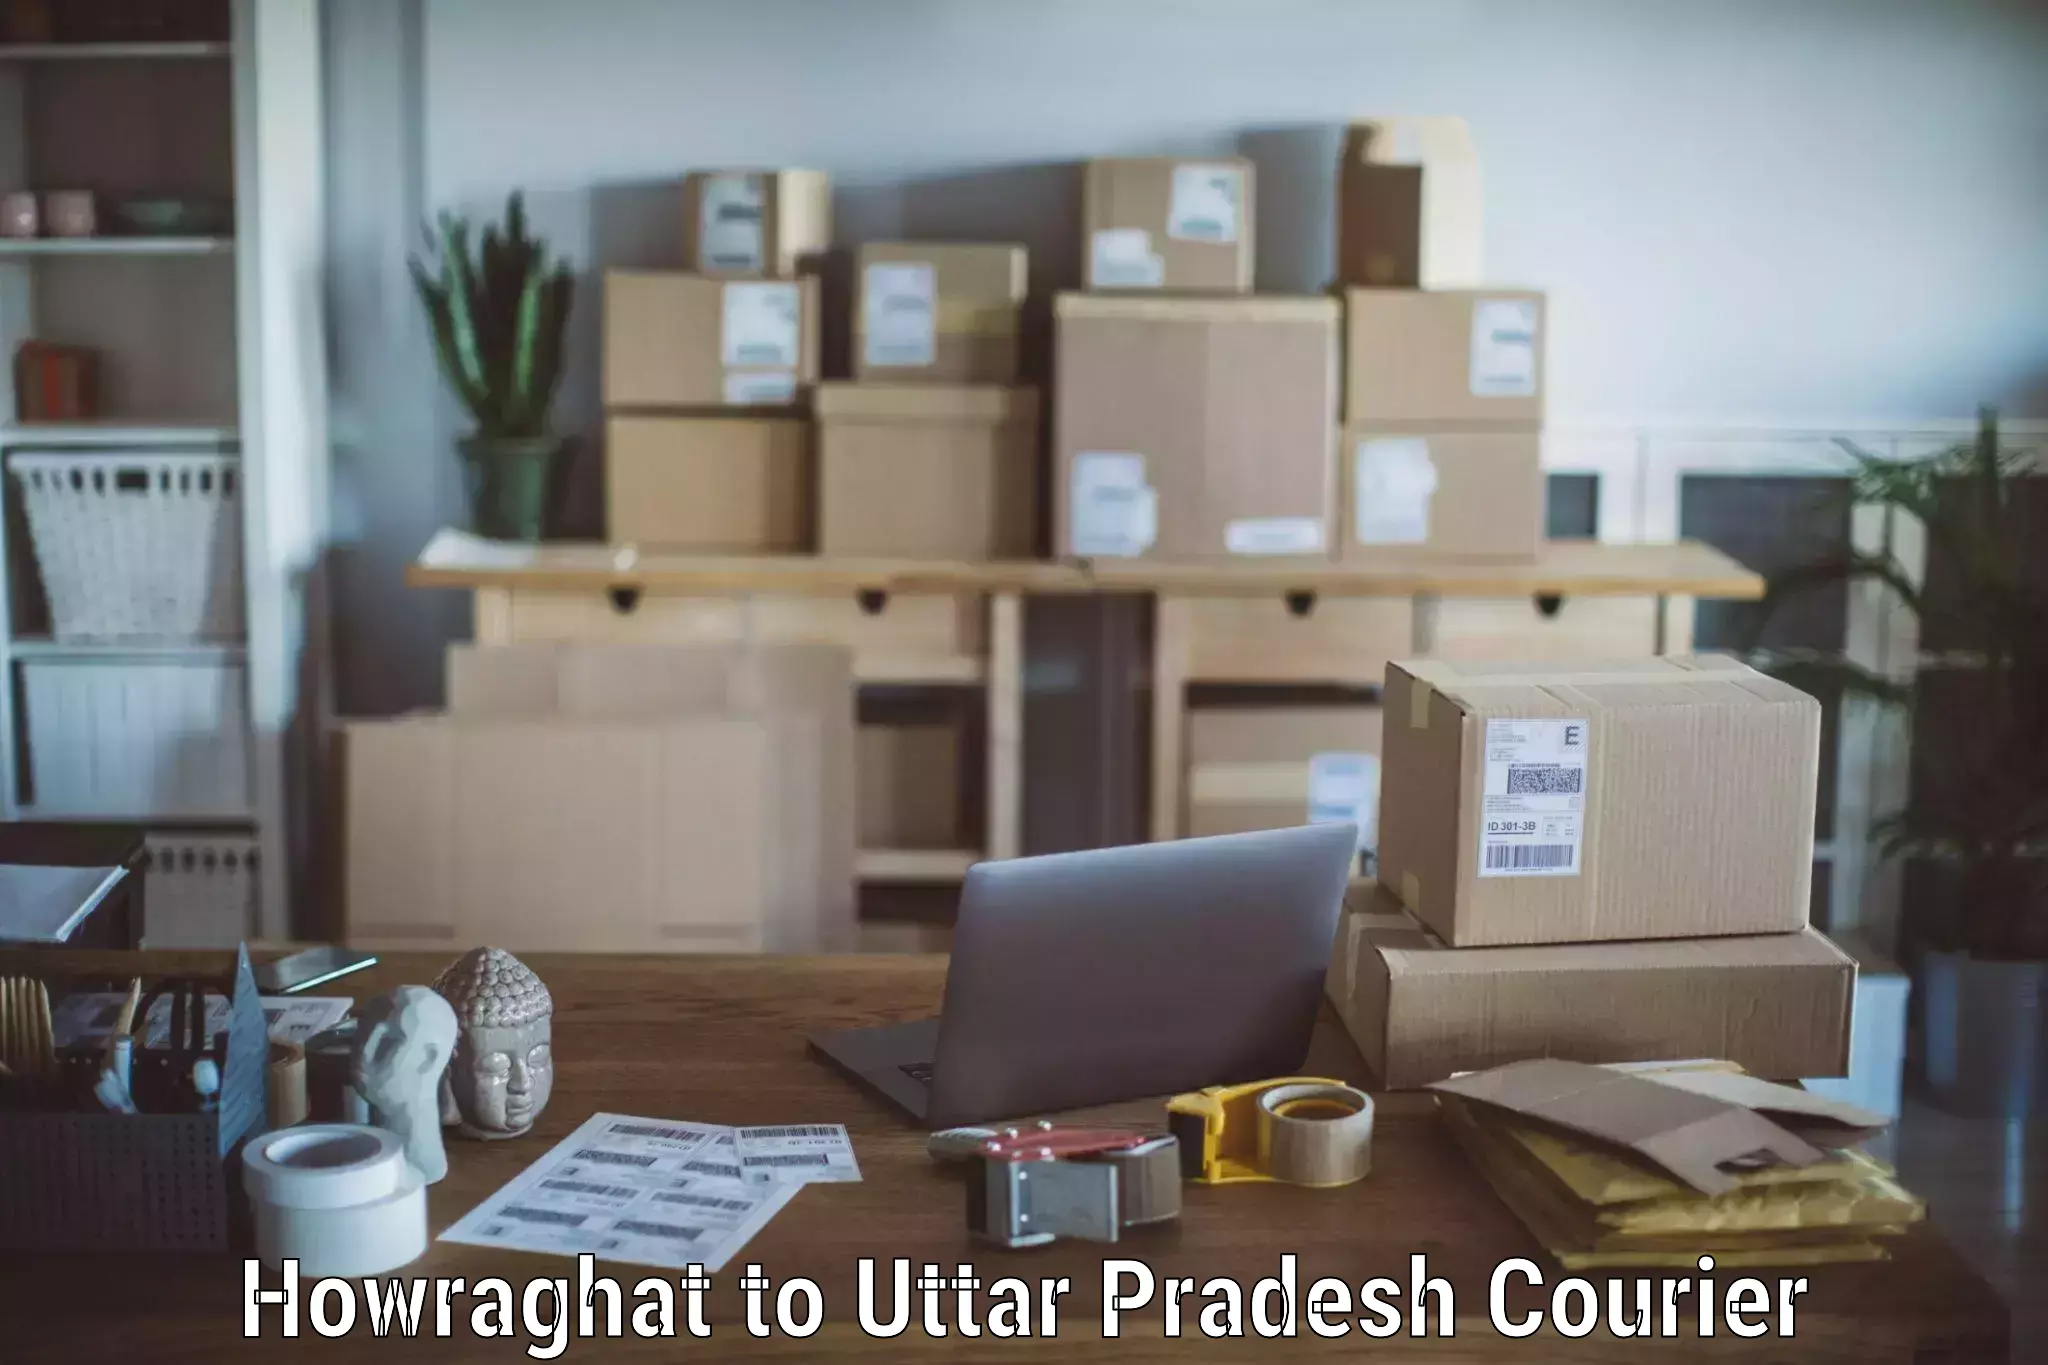 Furniture transport experts Howraghat to Unchahar